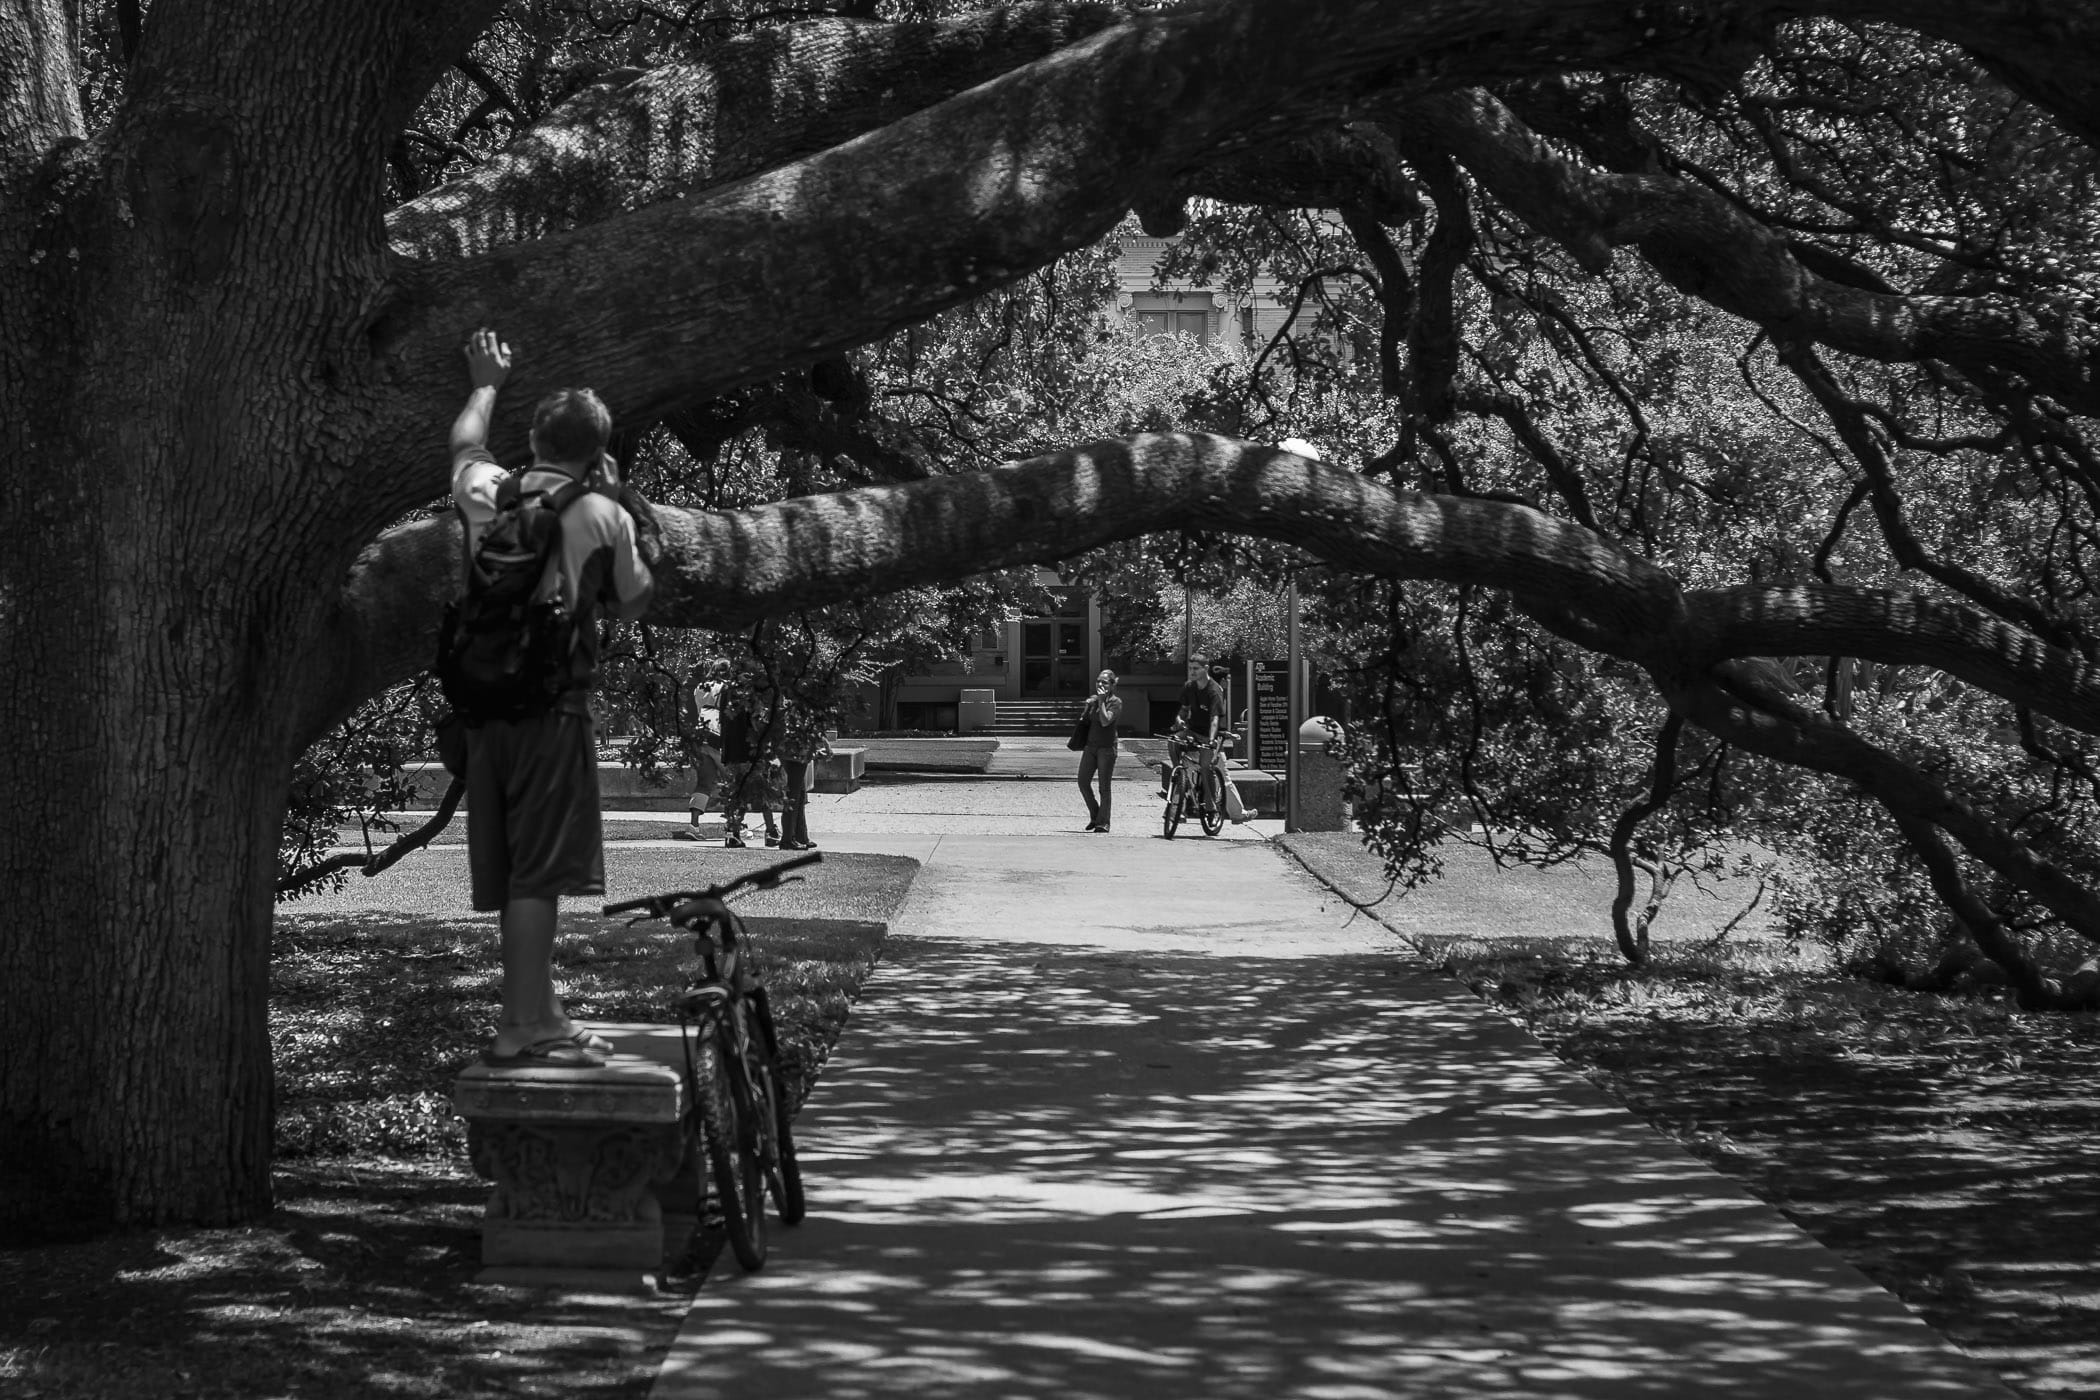 A student makes a phone call while standing on a bench under Texas A&M University's Century Oak, College Station, Texas.